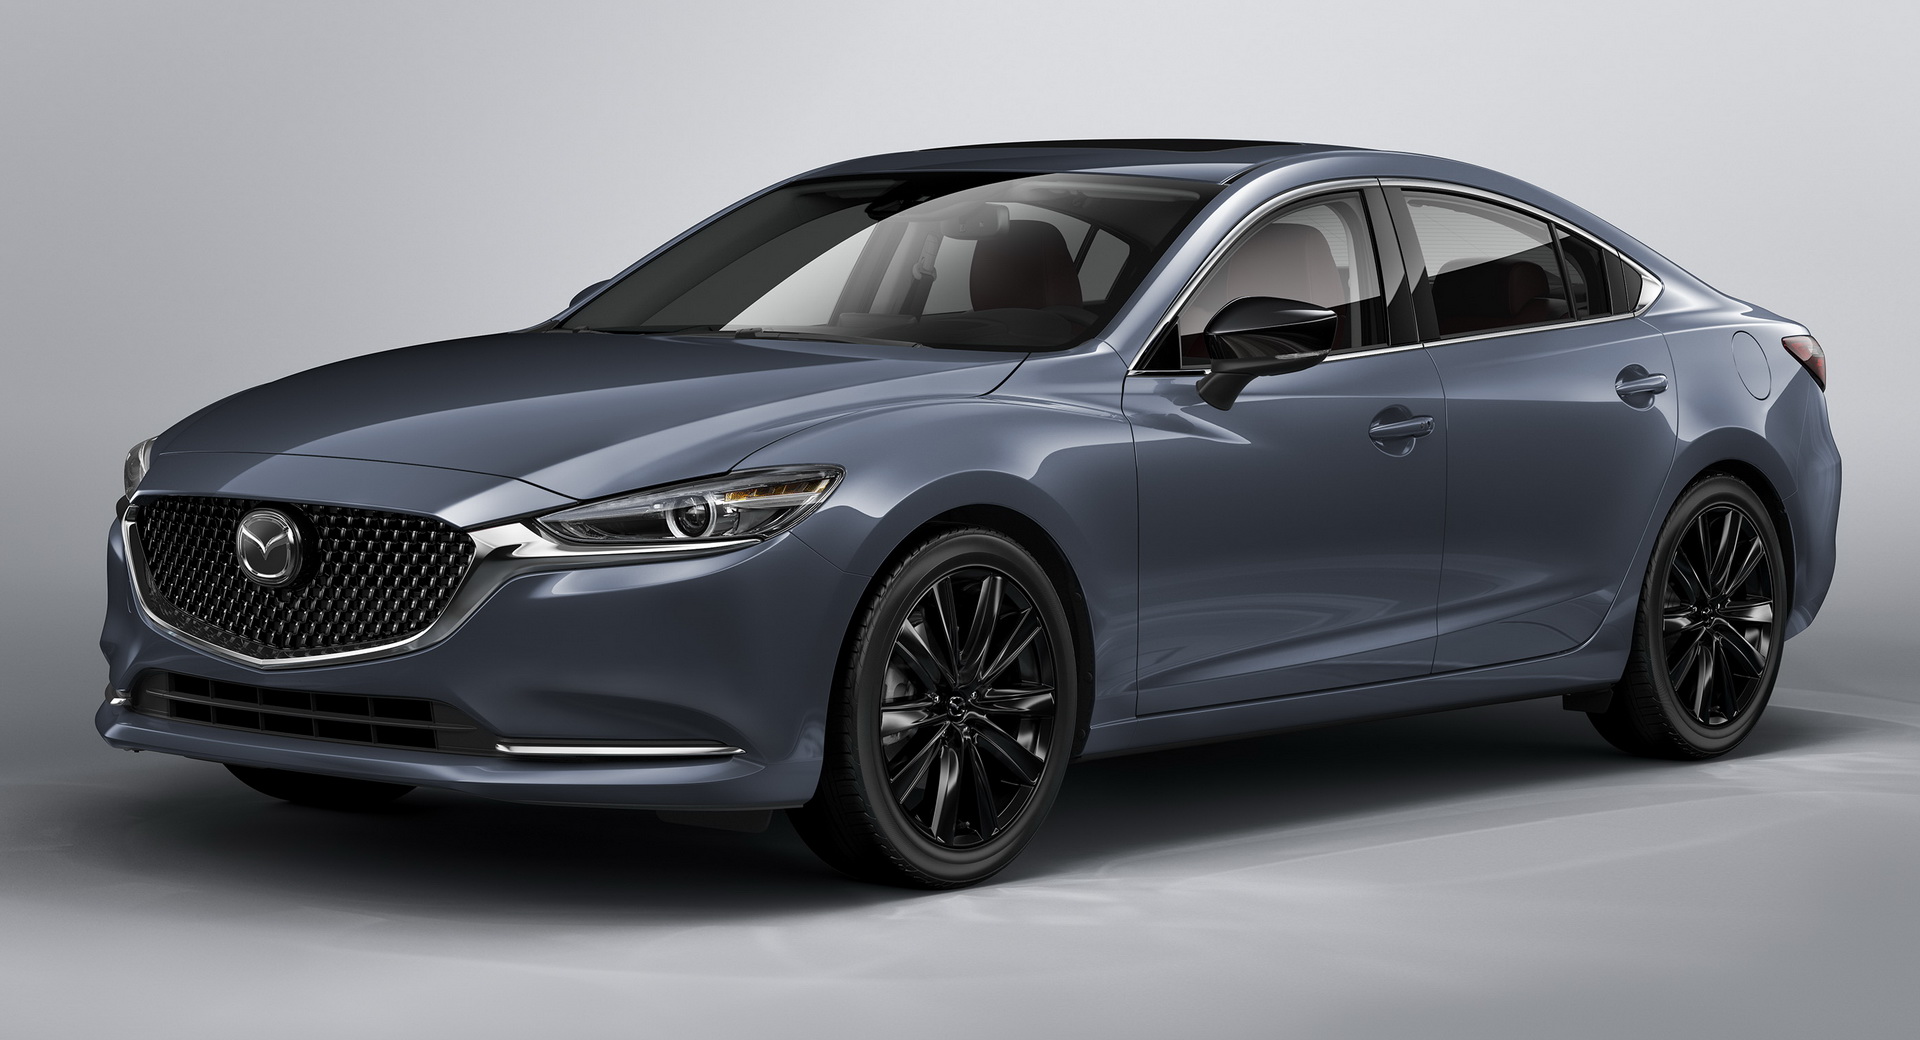 2021 Mazda6 Updated With New Carbon Edition, Wireless Apple CarPlay